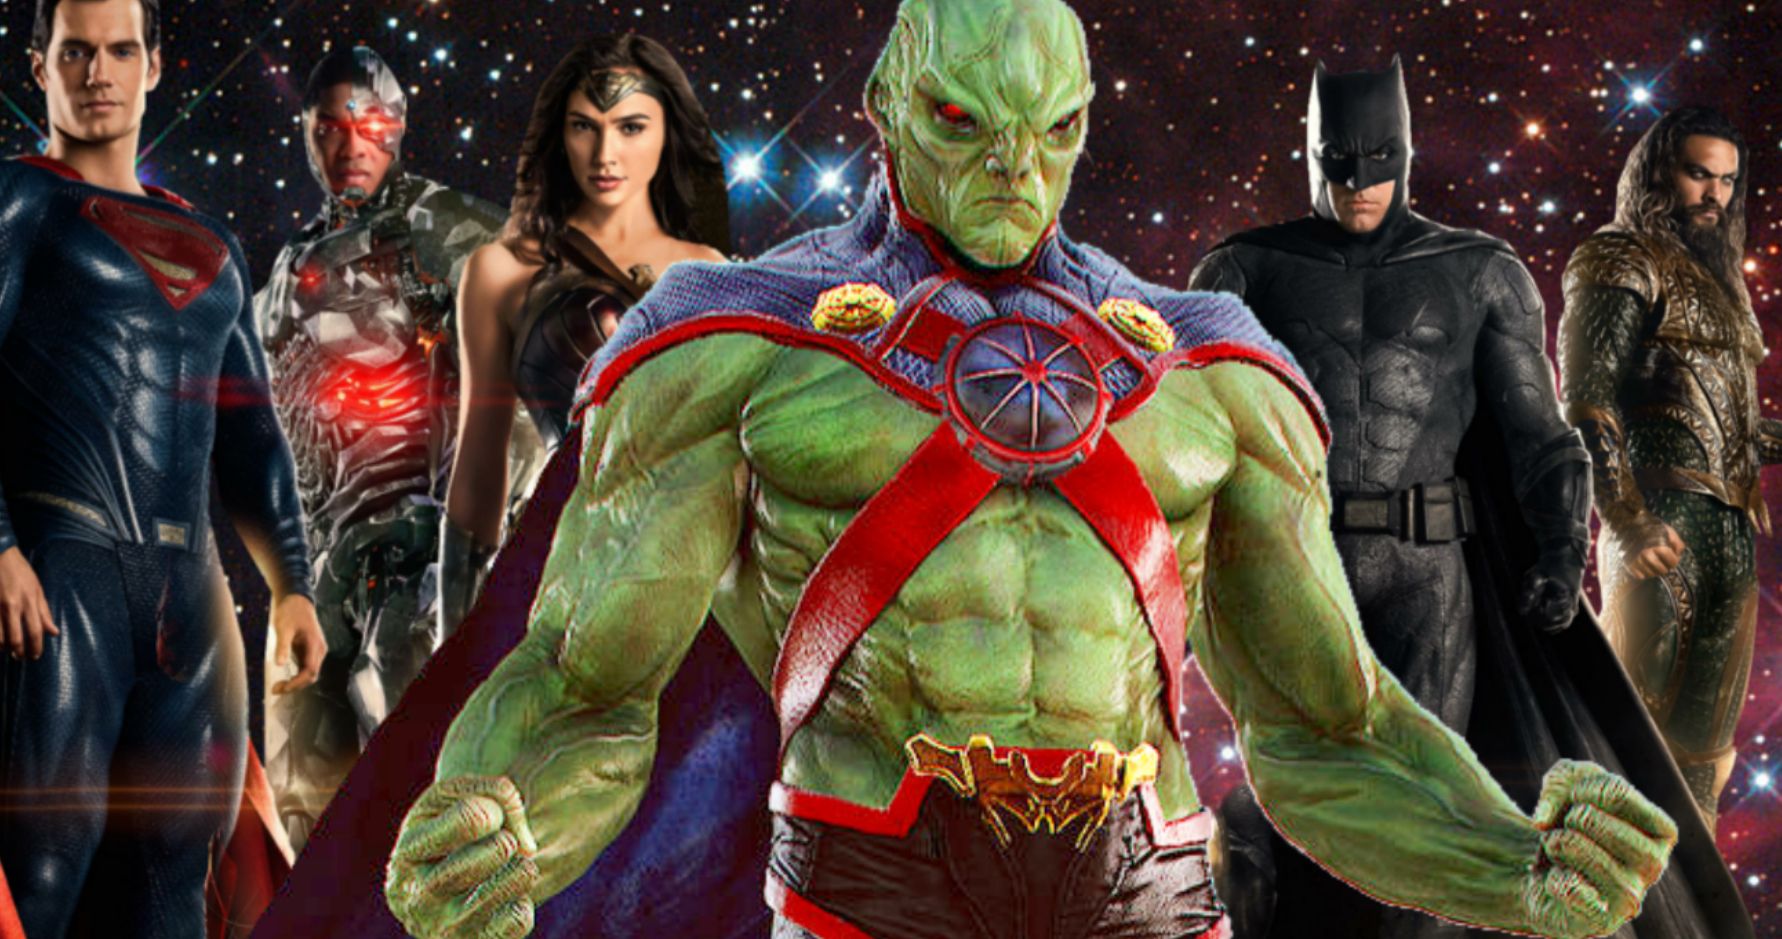 Martian Manhunter Teased in the Latest #ReleaseTheSnyderCut Images from Justice League